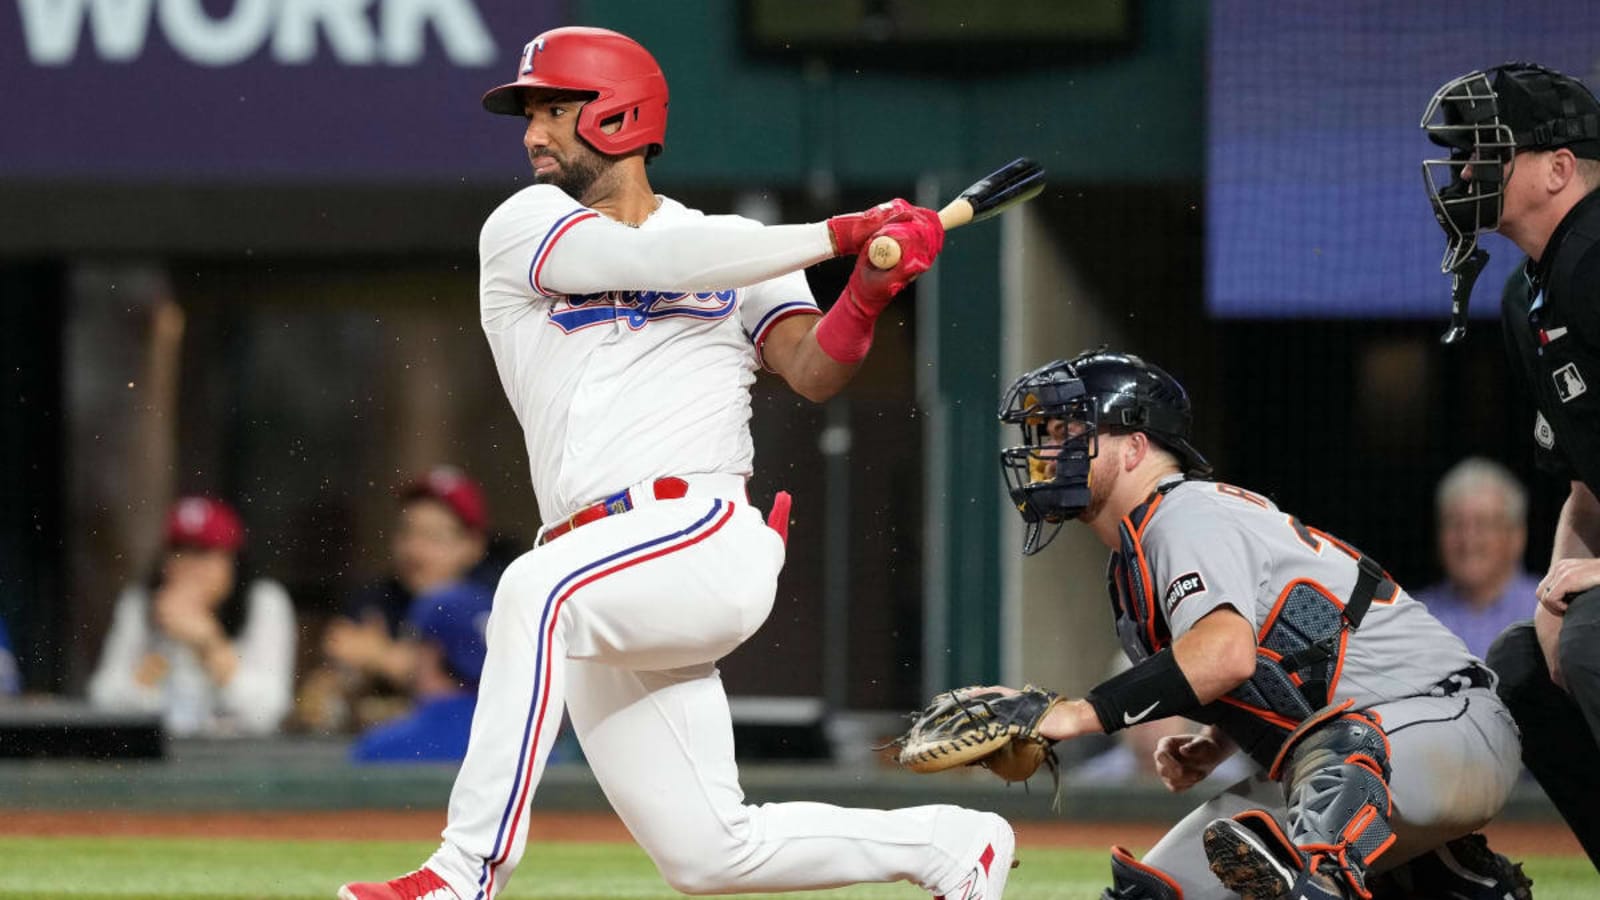 Duran Learning Ropes at DH With Rangers